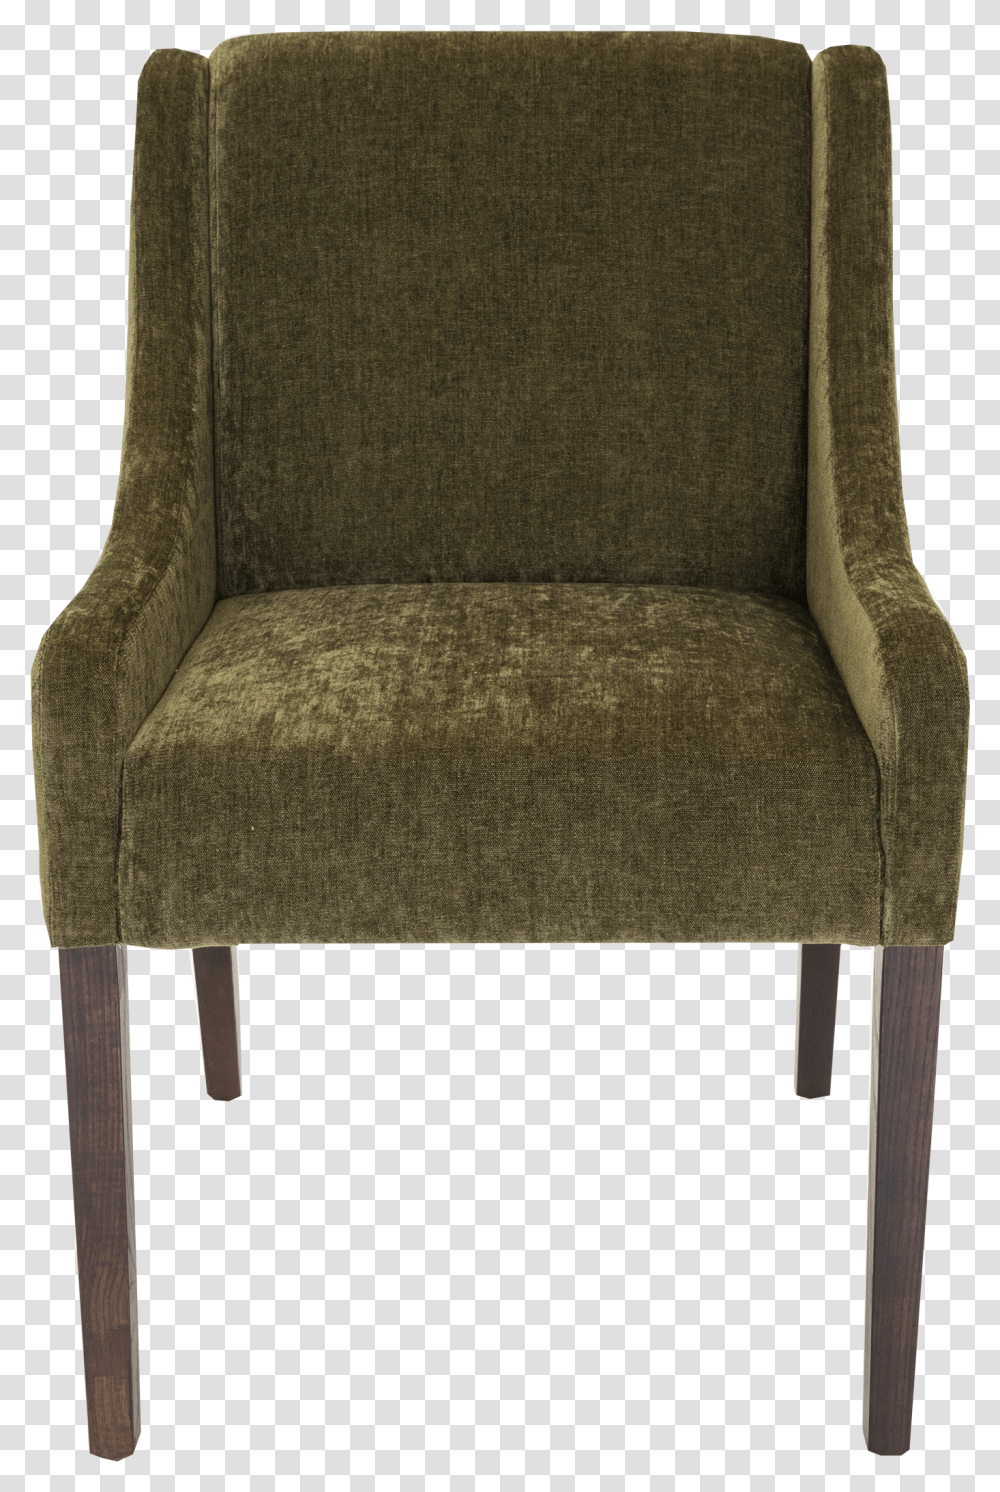 Front View Of Organic Green Luxurious Upholstered Chair Chair, Furniture, Armchair Transparent Png